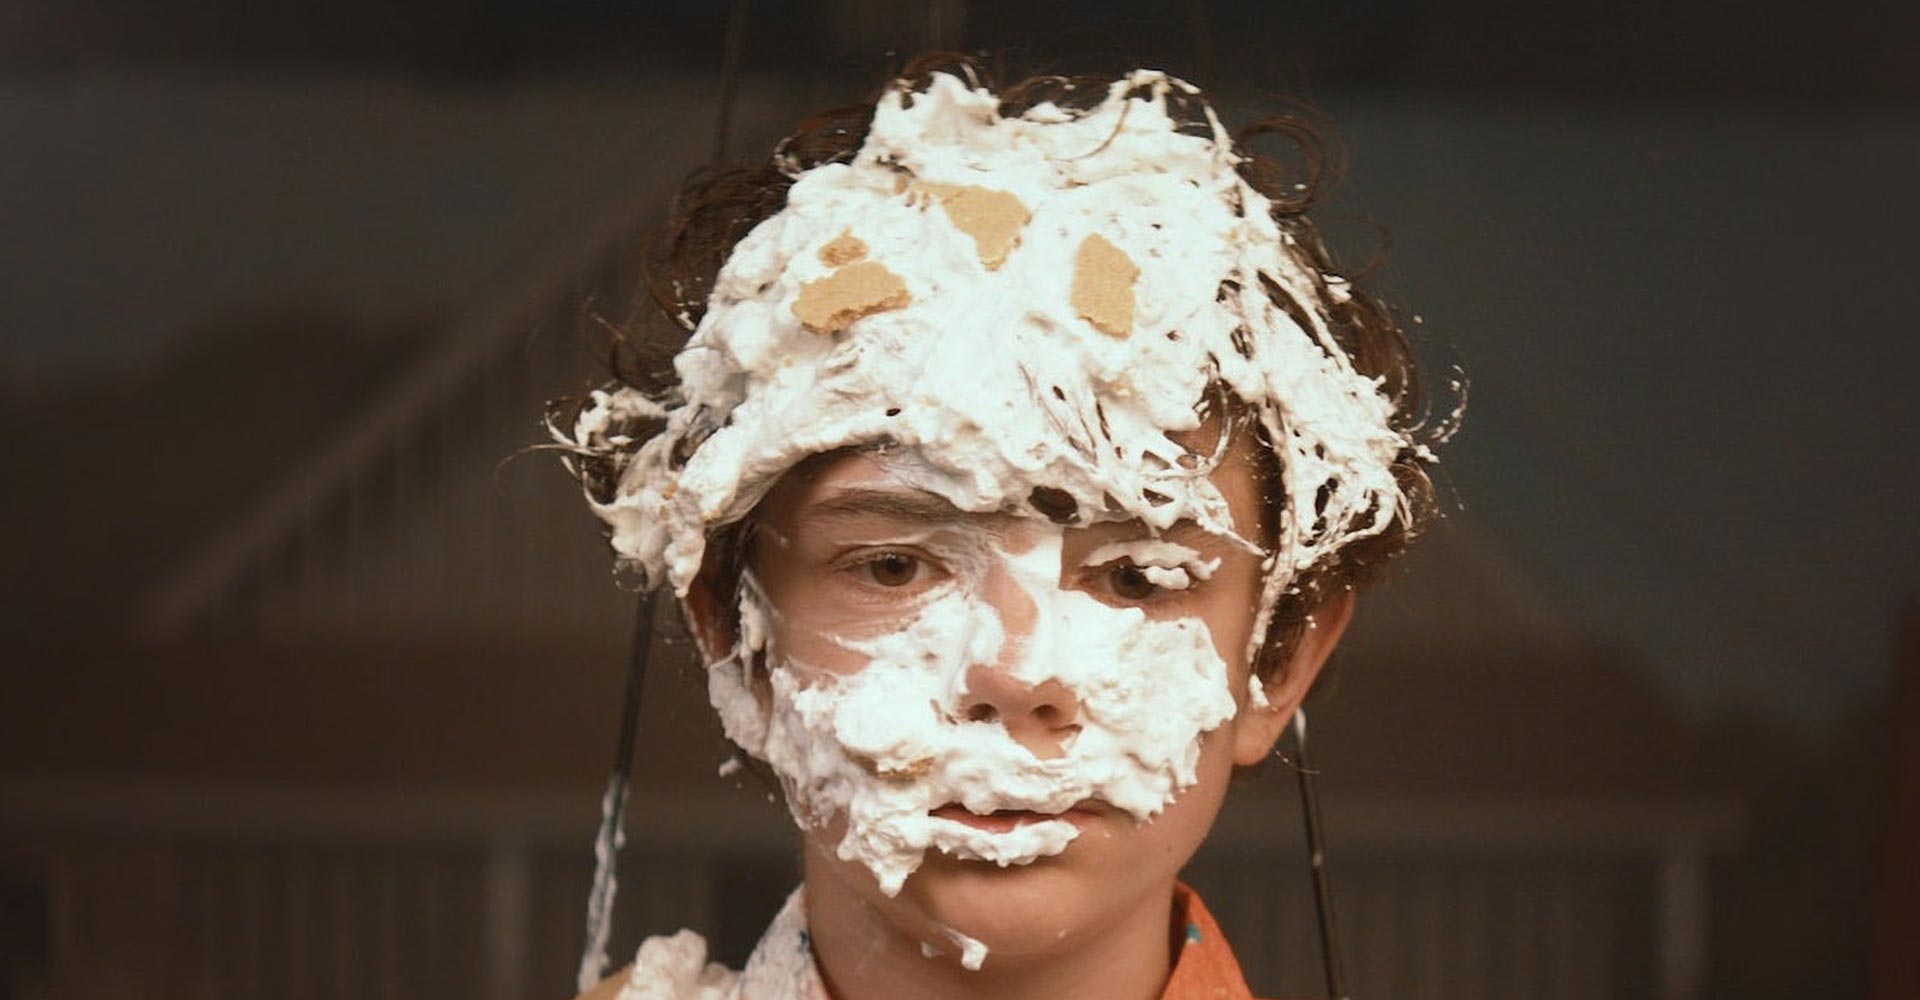 Image of a boy with shaving cream all over his face